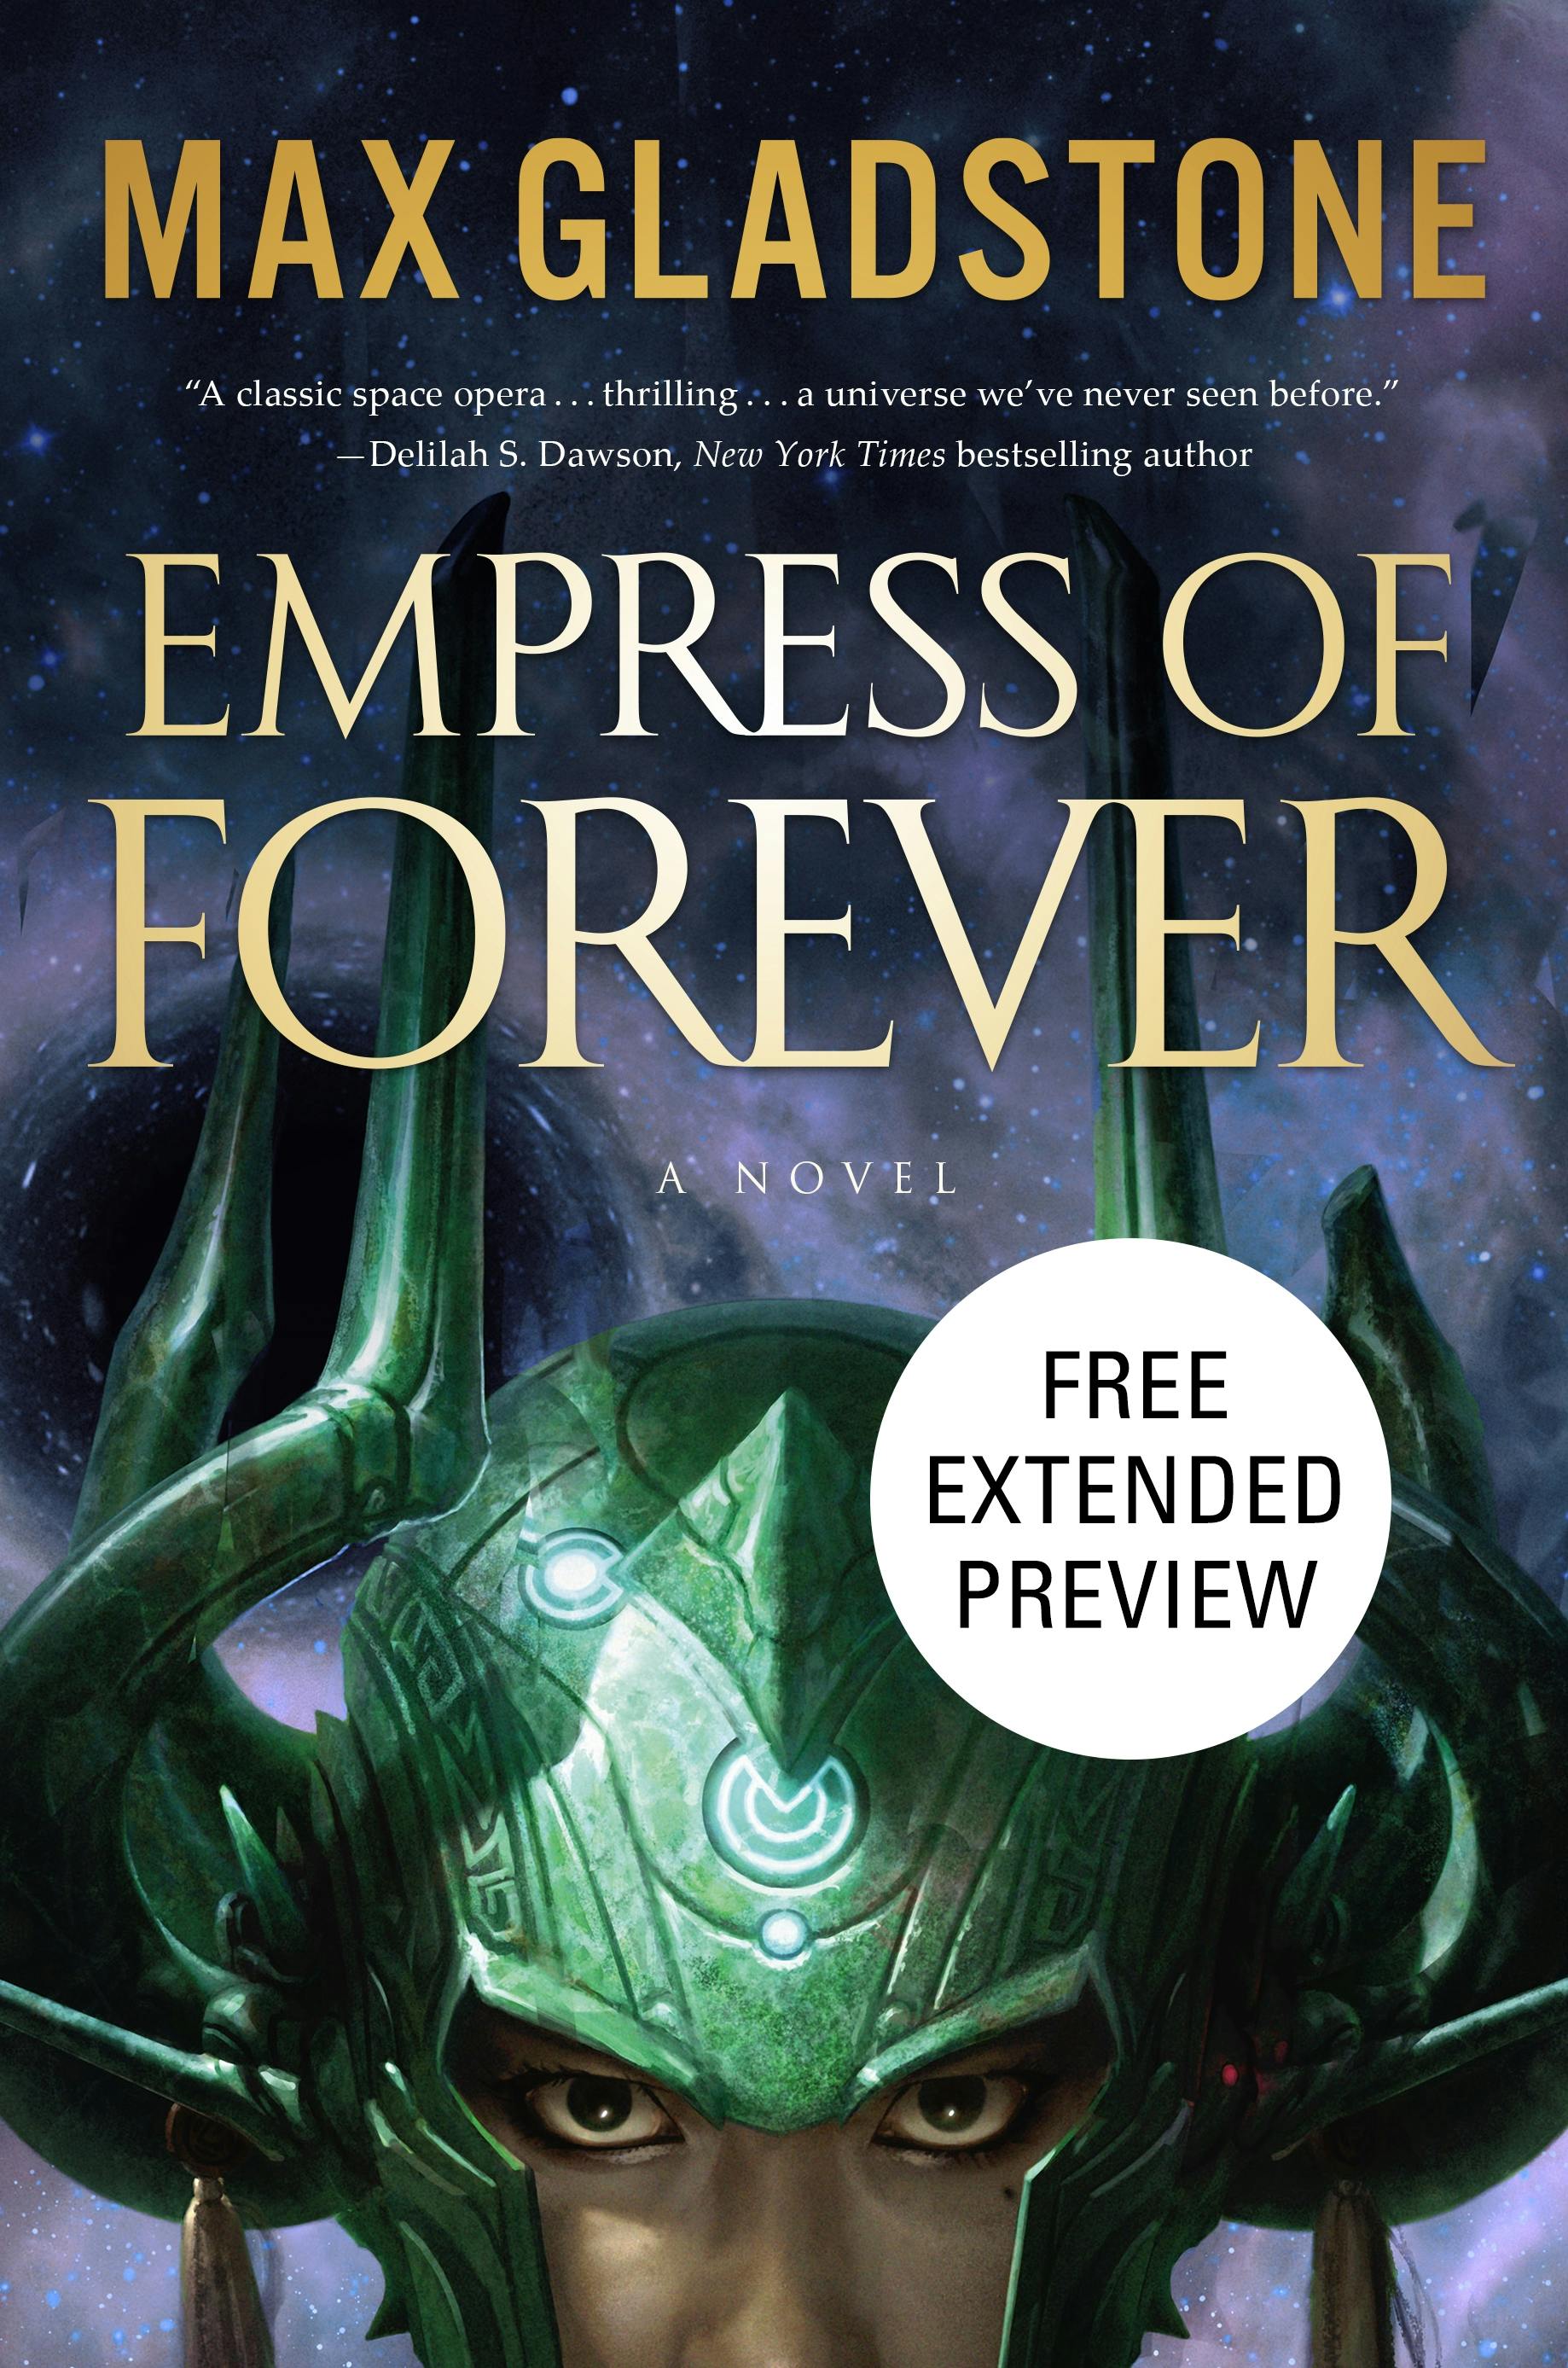 Cover for the book titled as: Empress of Forever Sneak Peek